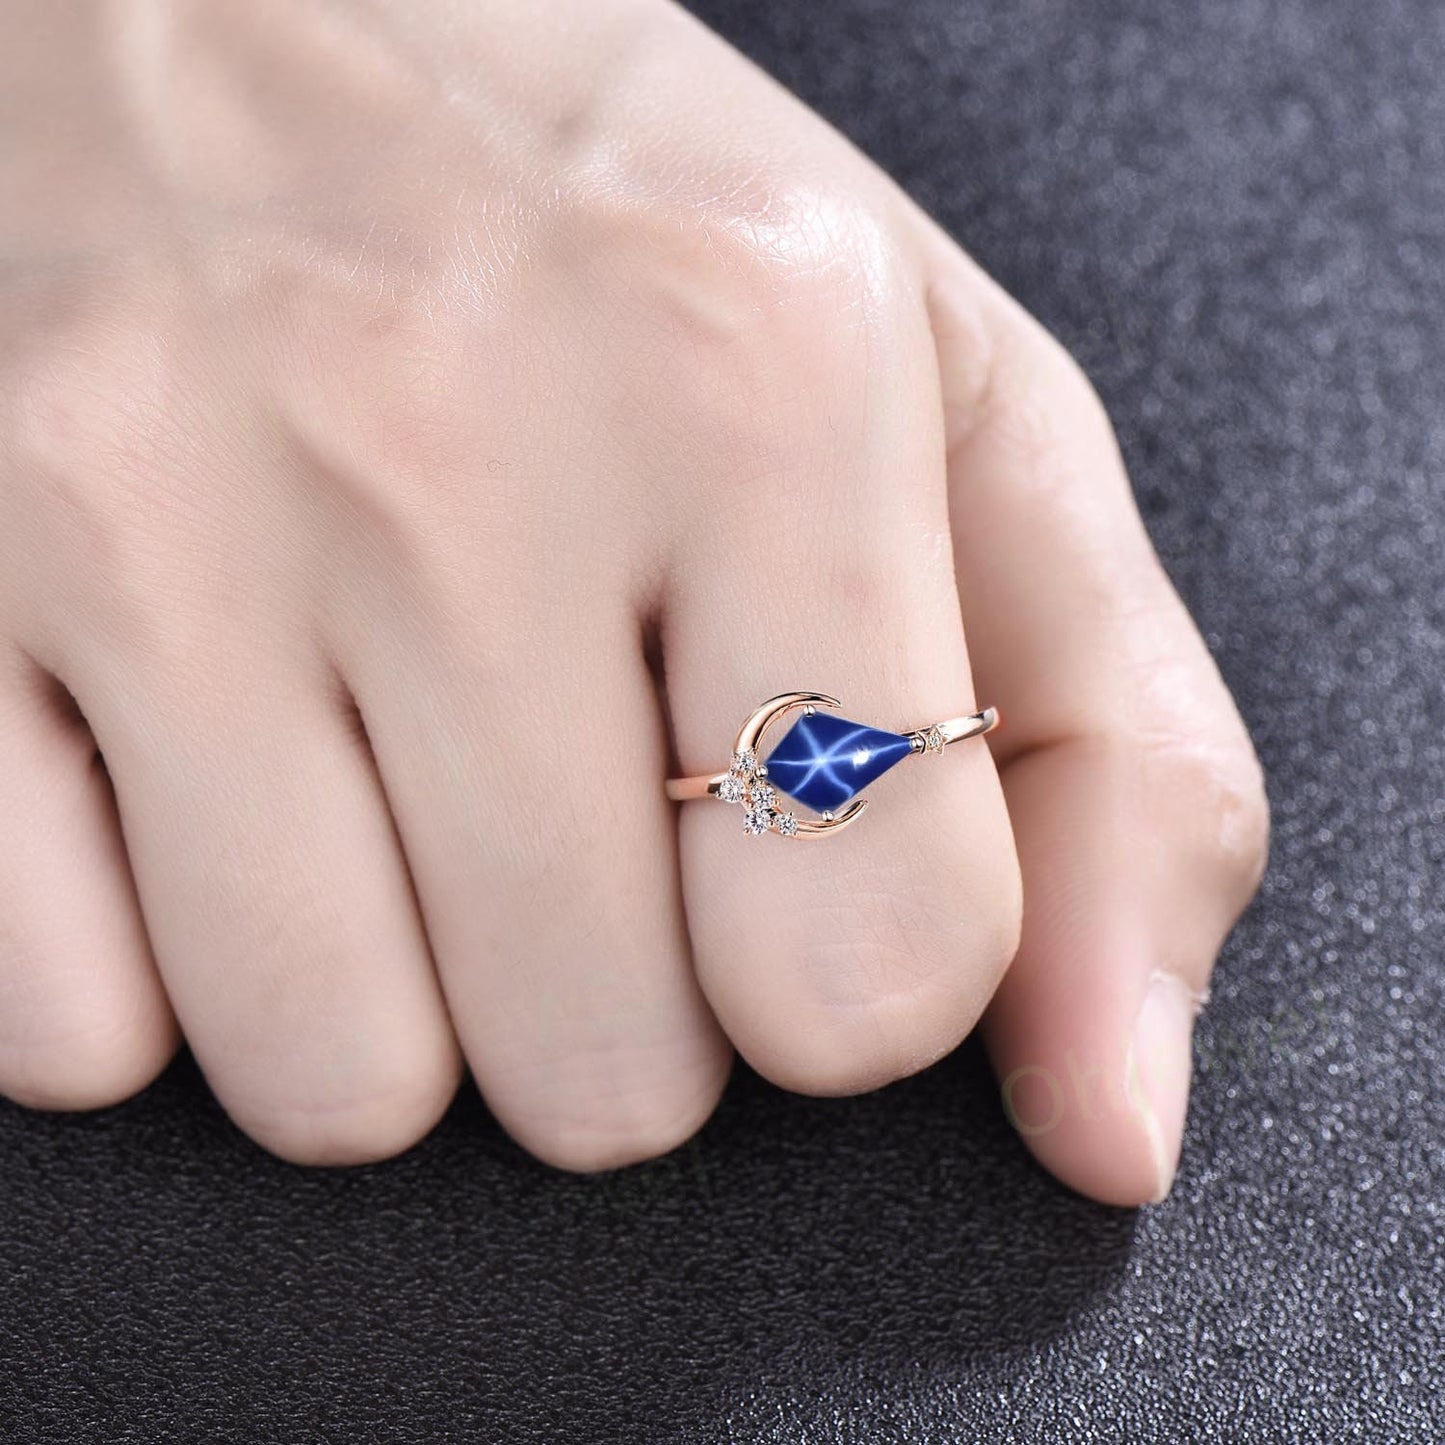 Kite blue star sapphire ring vintage cluster diamond yellow gold east to west moon engagement ring gemstone unique anniversary ring women